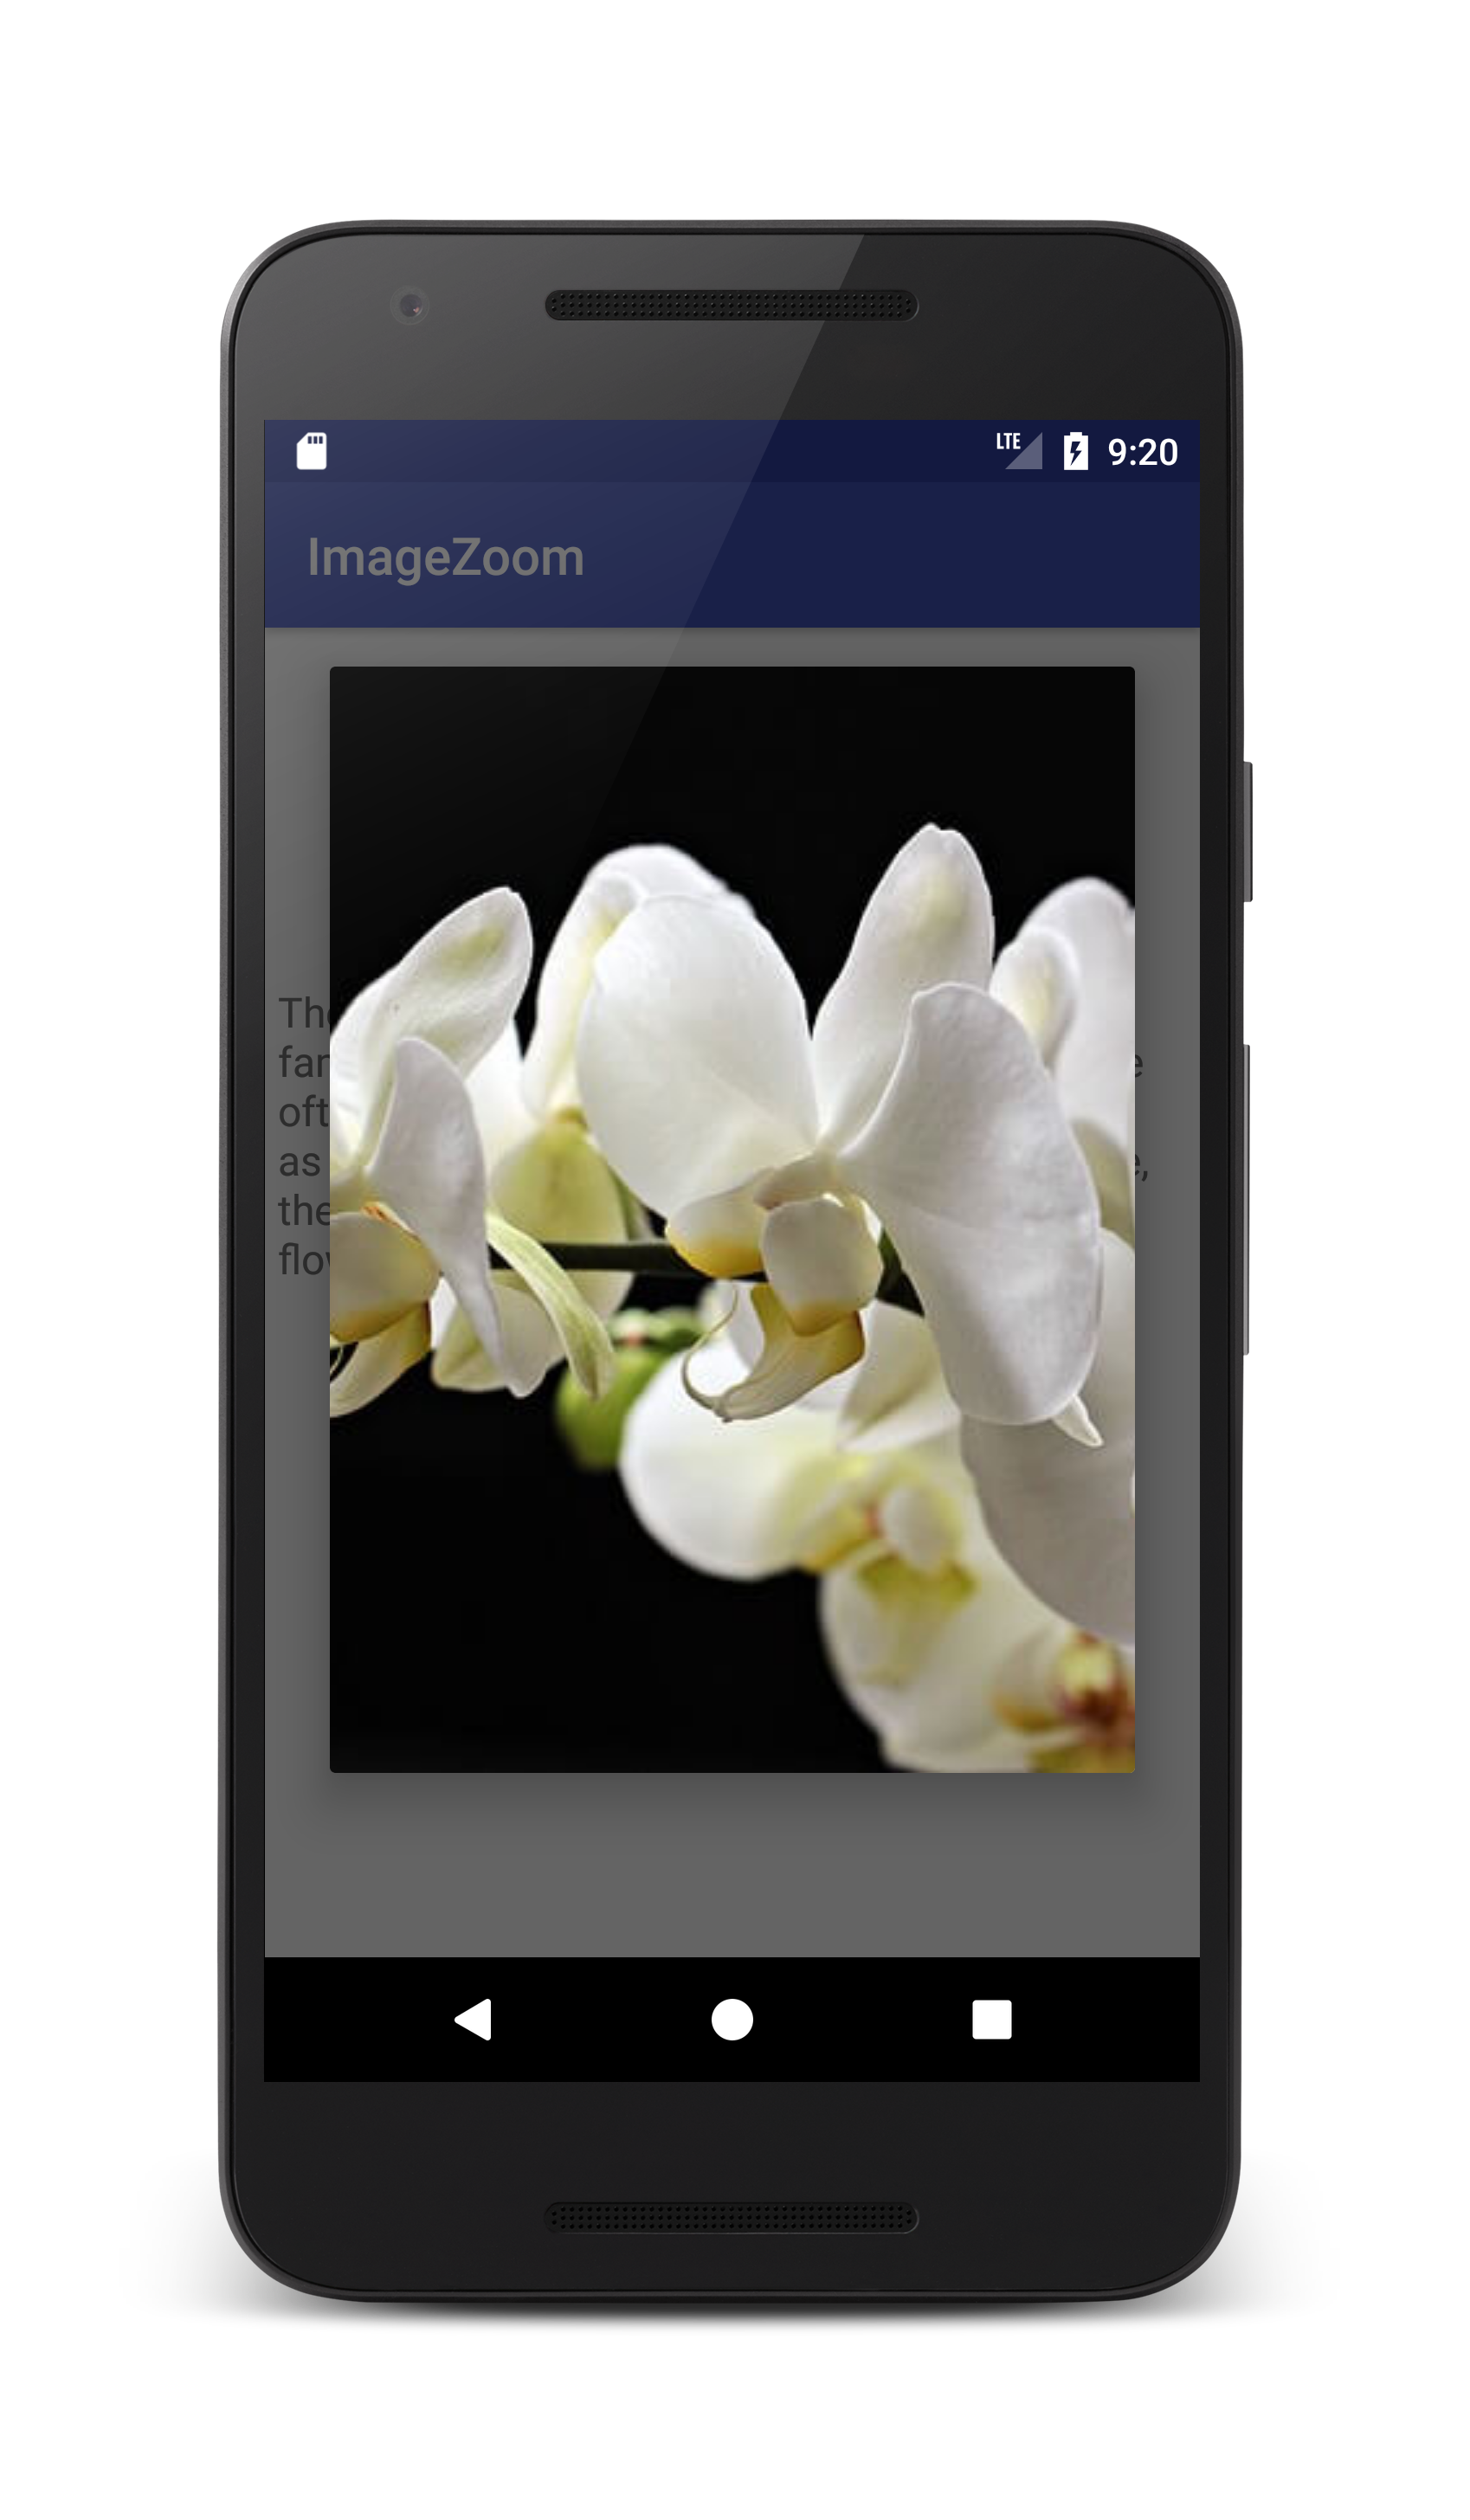 Pinch to Zoom Android ImageView Tutorial - Coding Demos